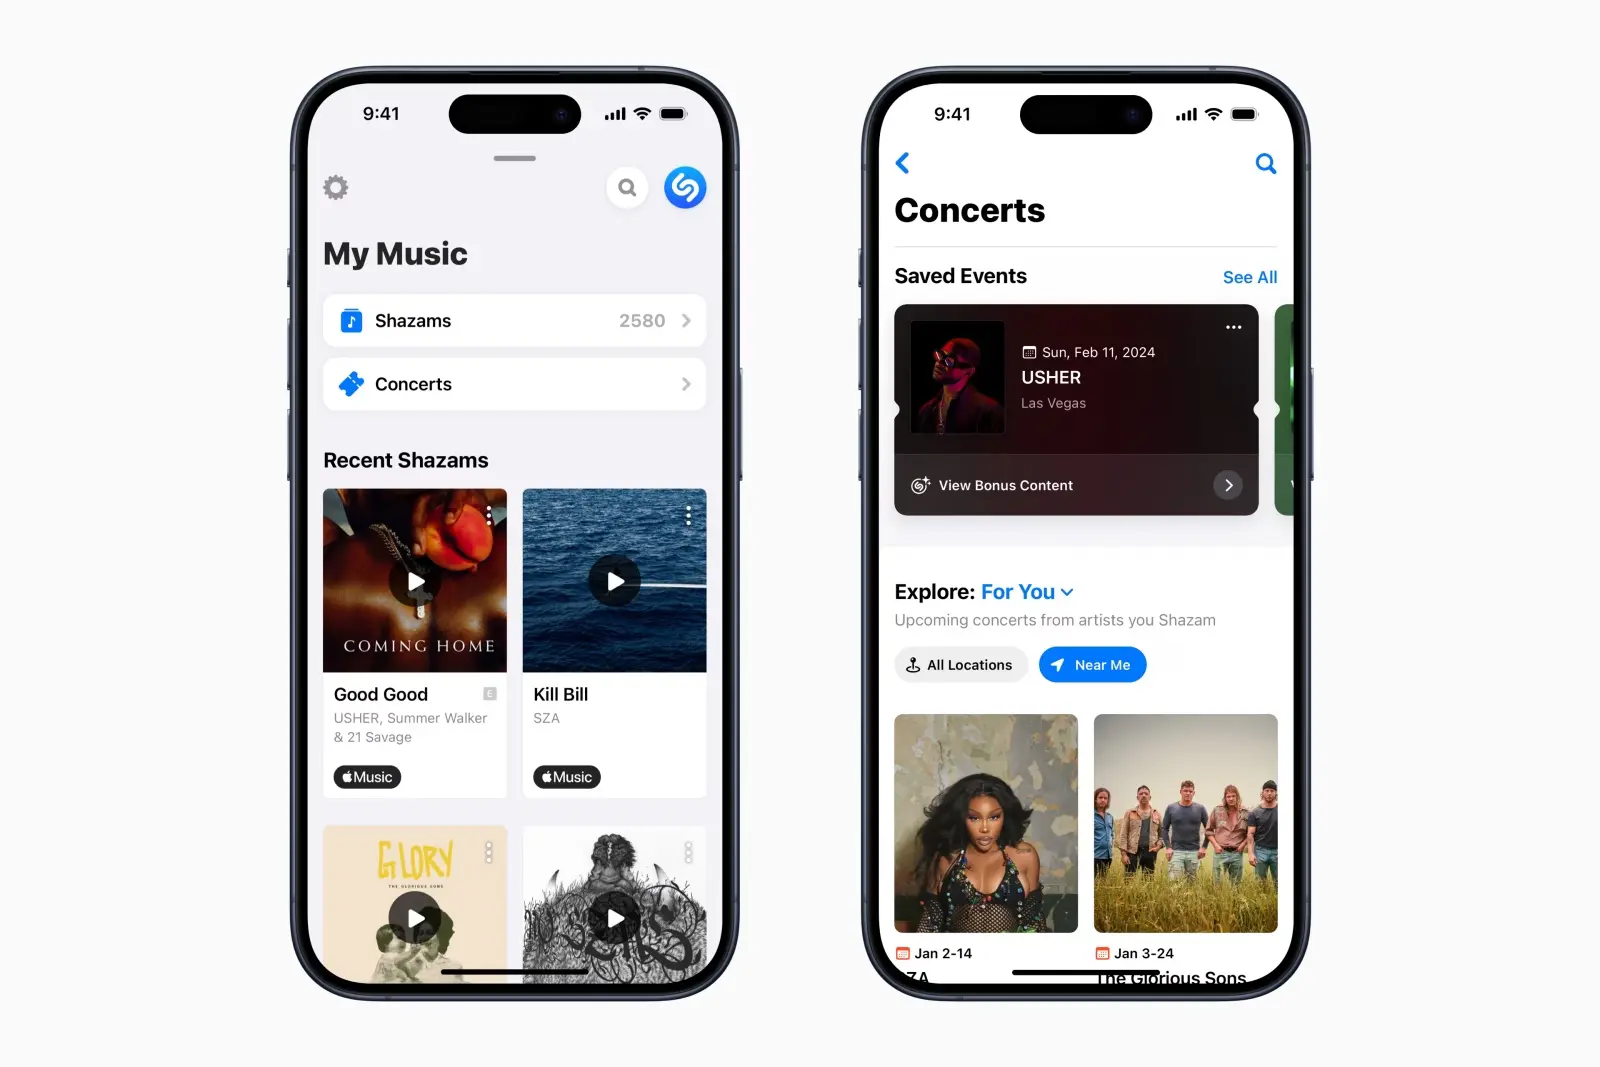 How to Find Music Concerts in Your Area Using Shazam